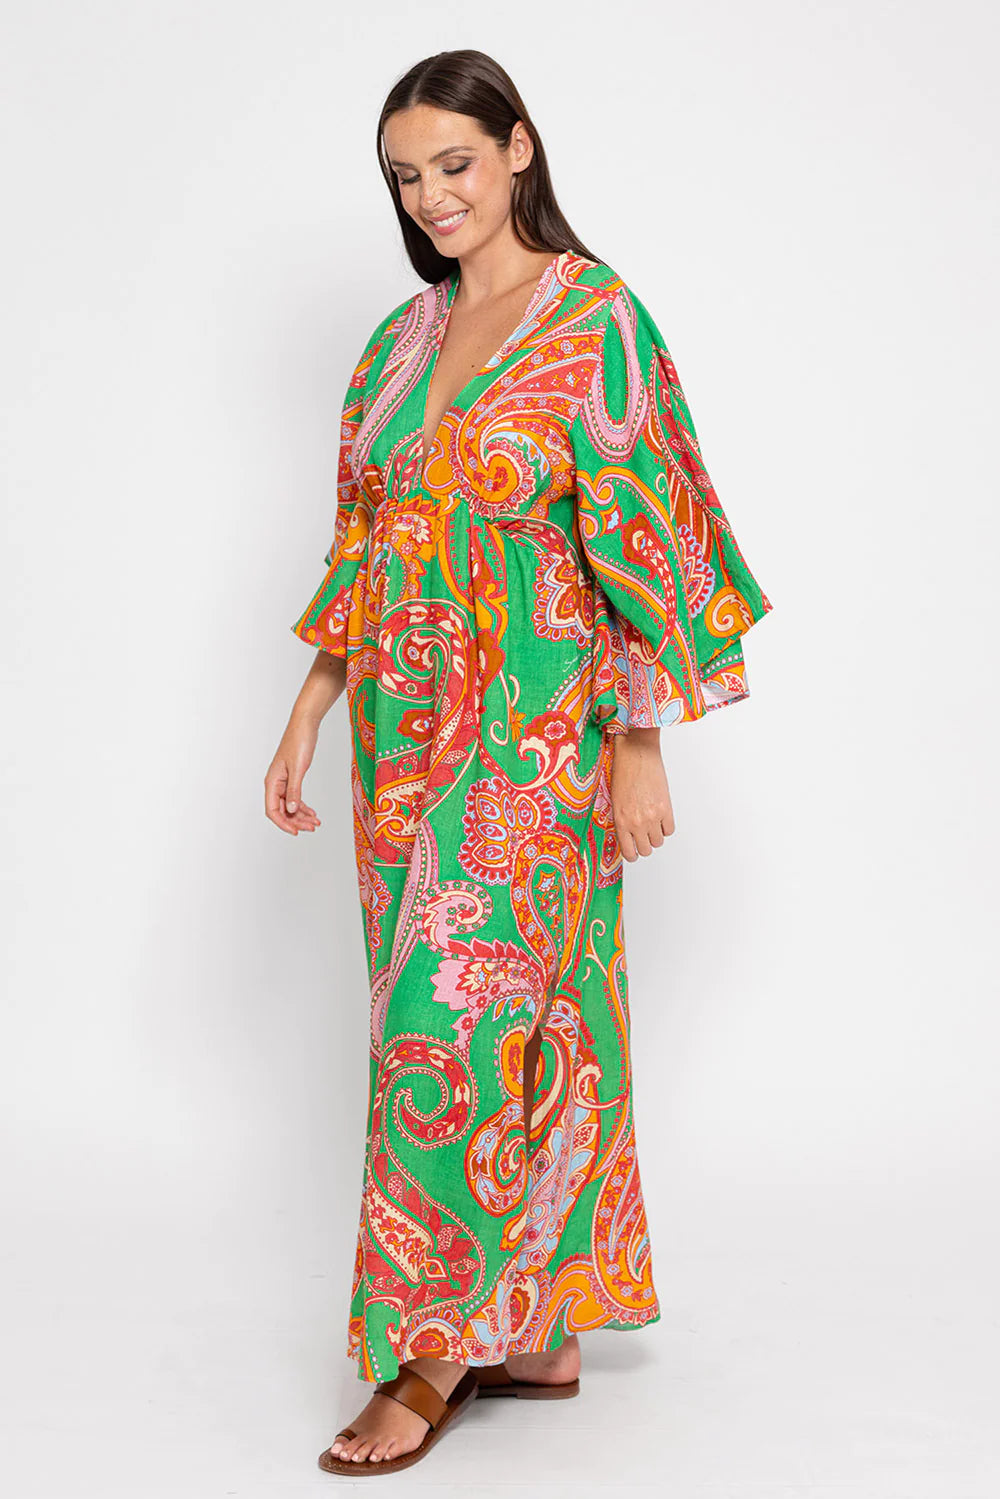 Green orange and red deep V midi dress with three quarter length fluted sleeves and side splits in green with paisley print